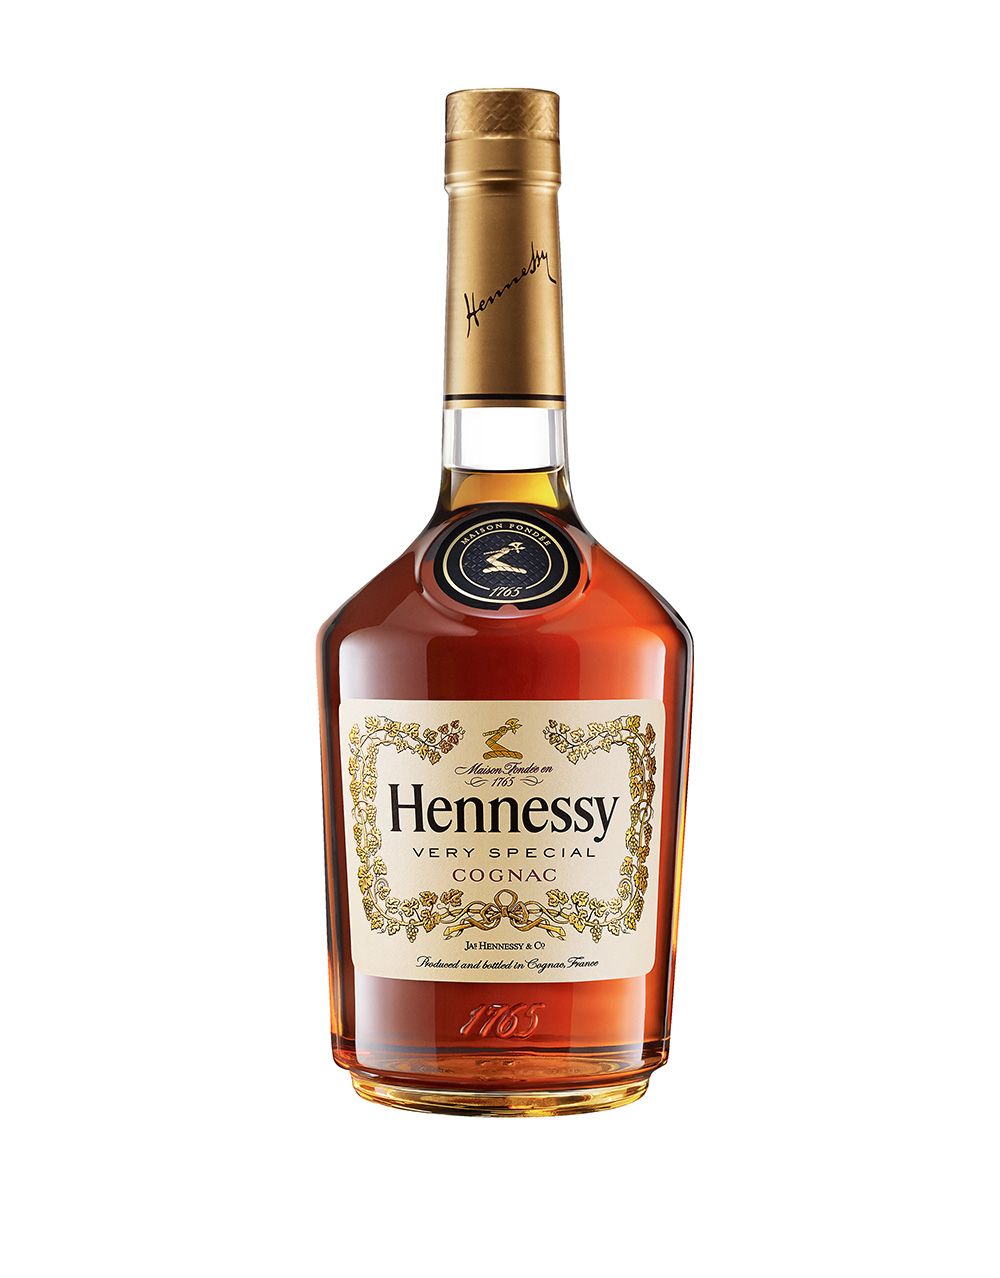 Moët Hennessy and Campari form wine and spirits ecommerce joint